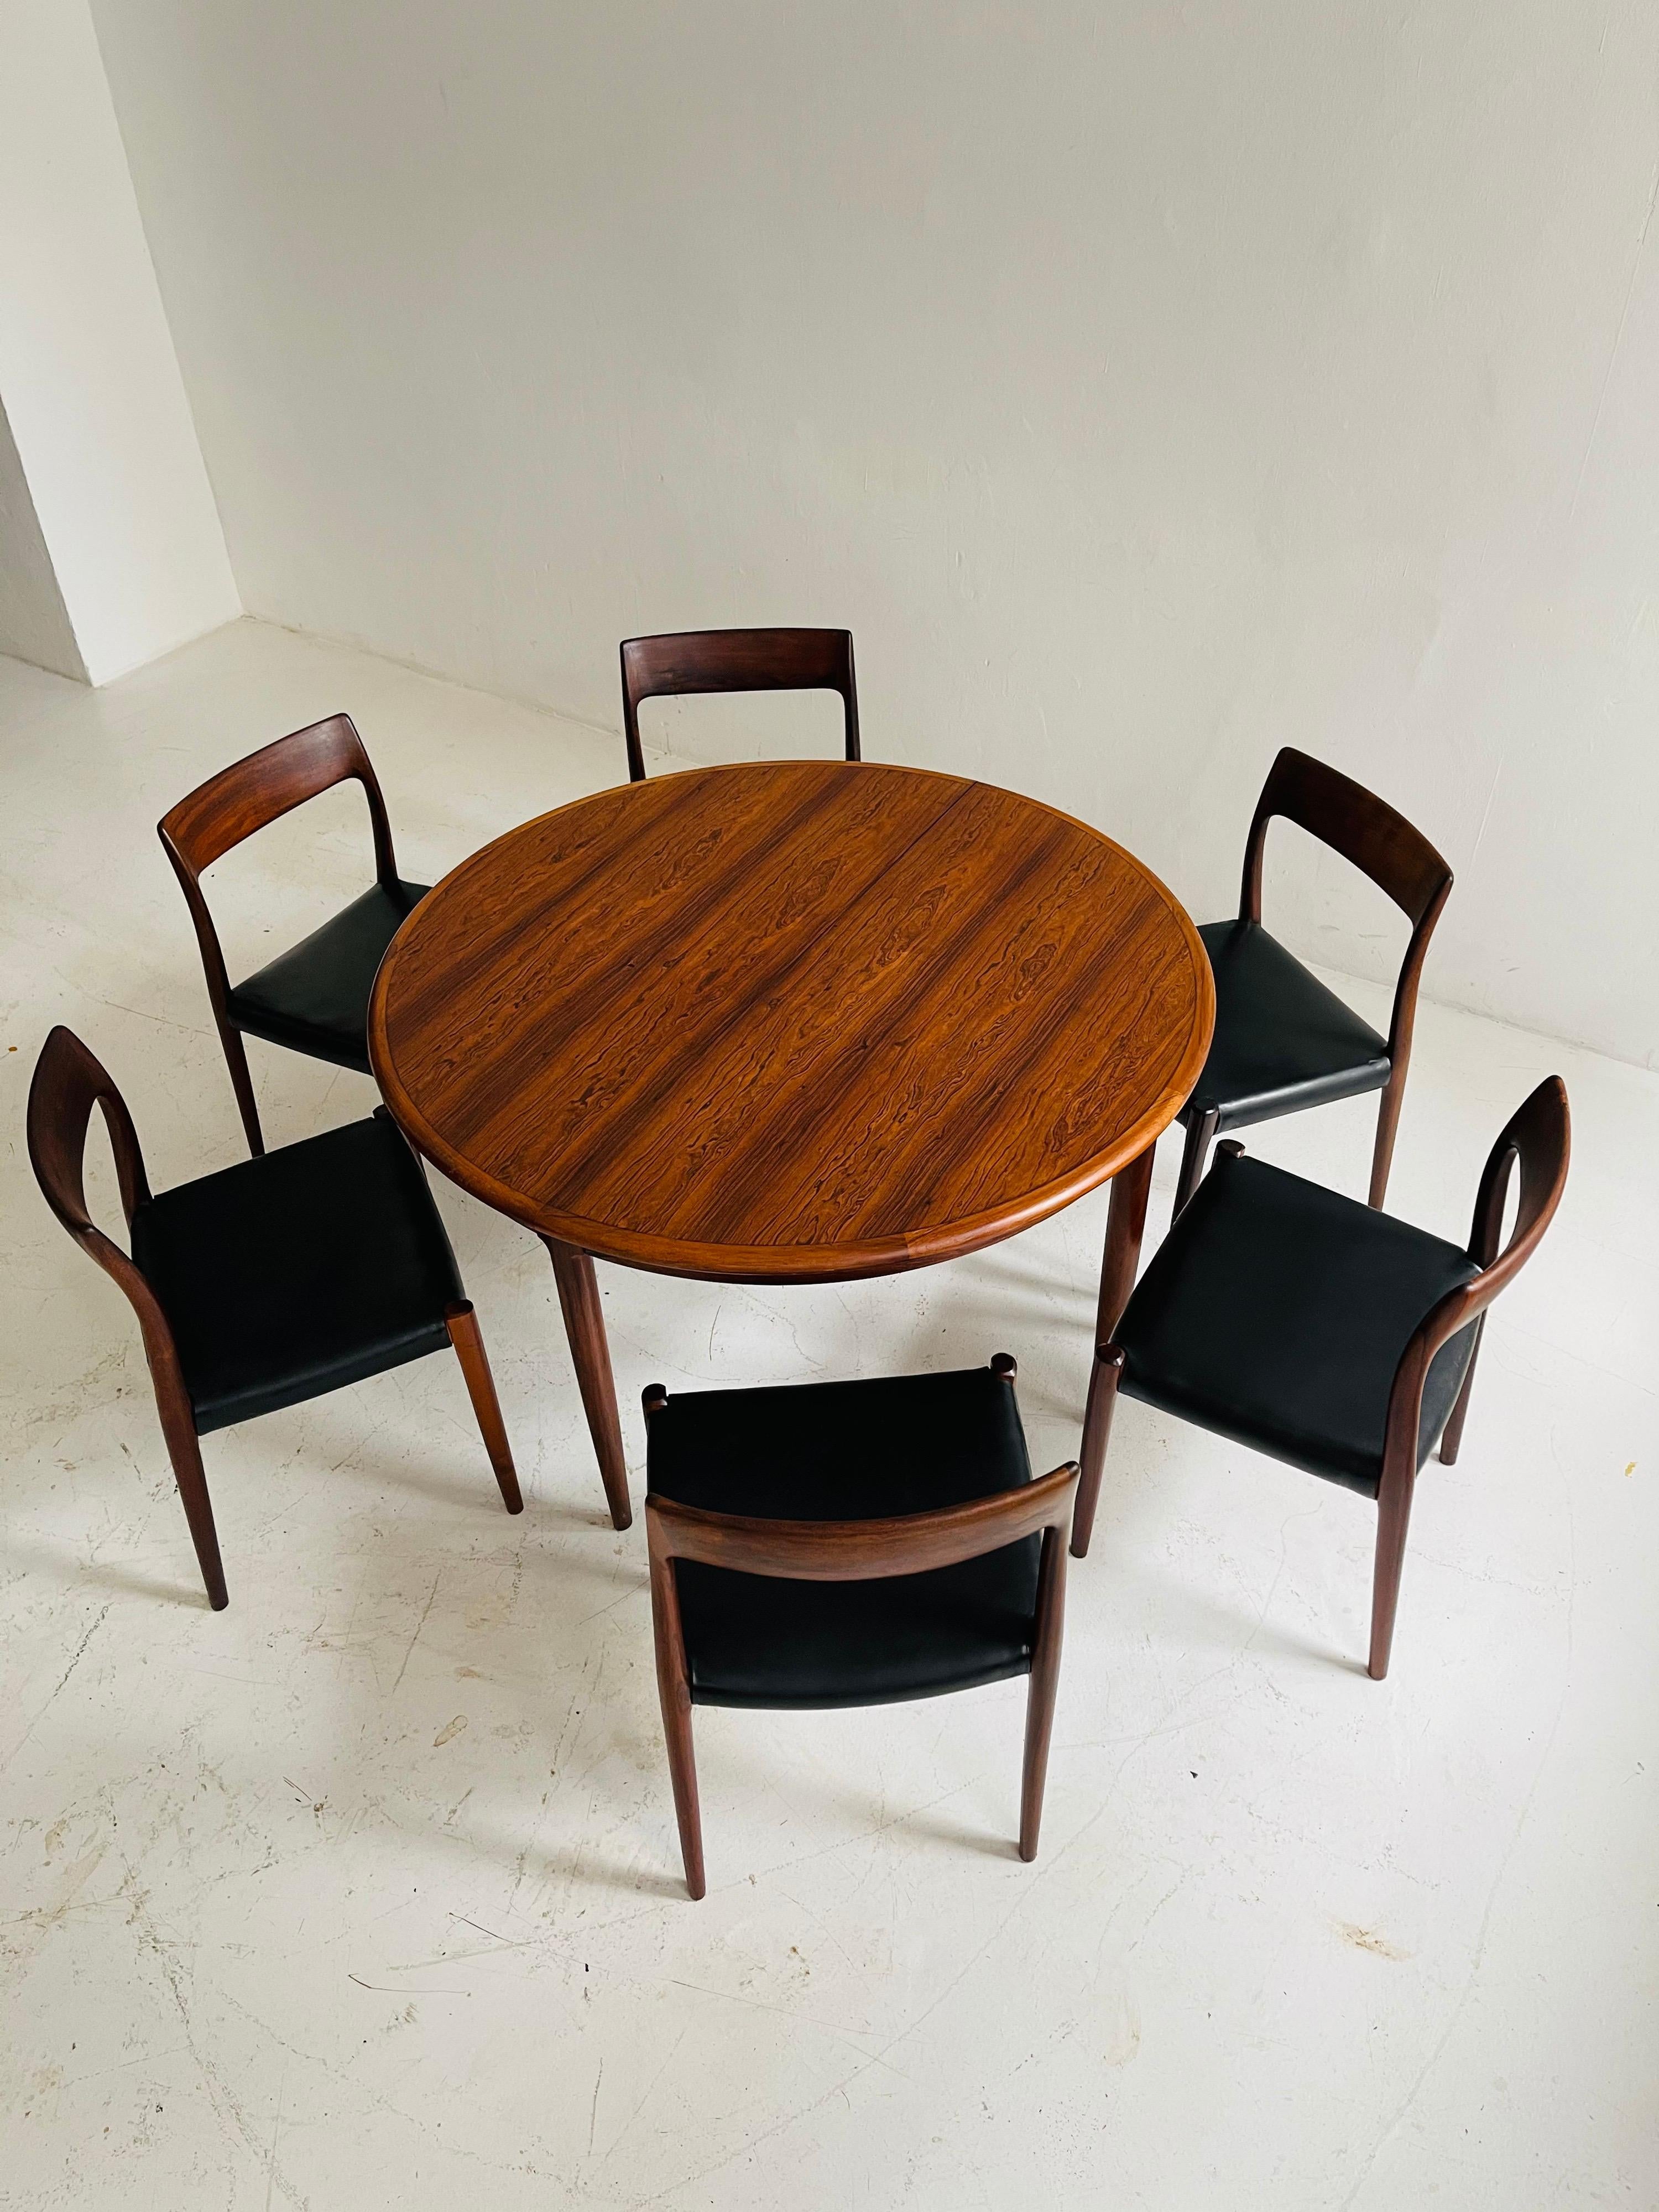 Niels O. Møller dining chairs No 77 set of six by Møllers Møbelfabrik in Denmark and matching Niels O. Møller dining table Produced by J.L. Møllers Møbelfabrik in Denmark, 1960s.